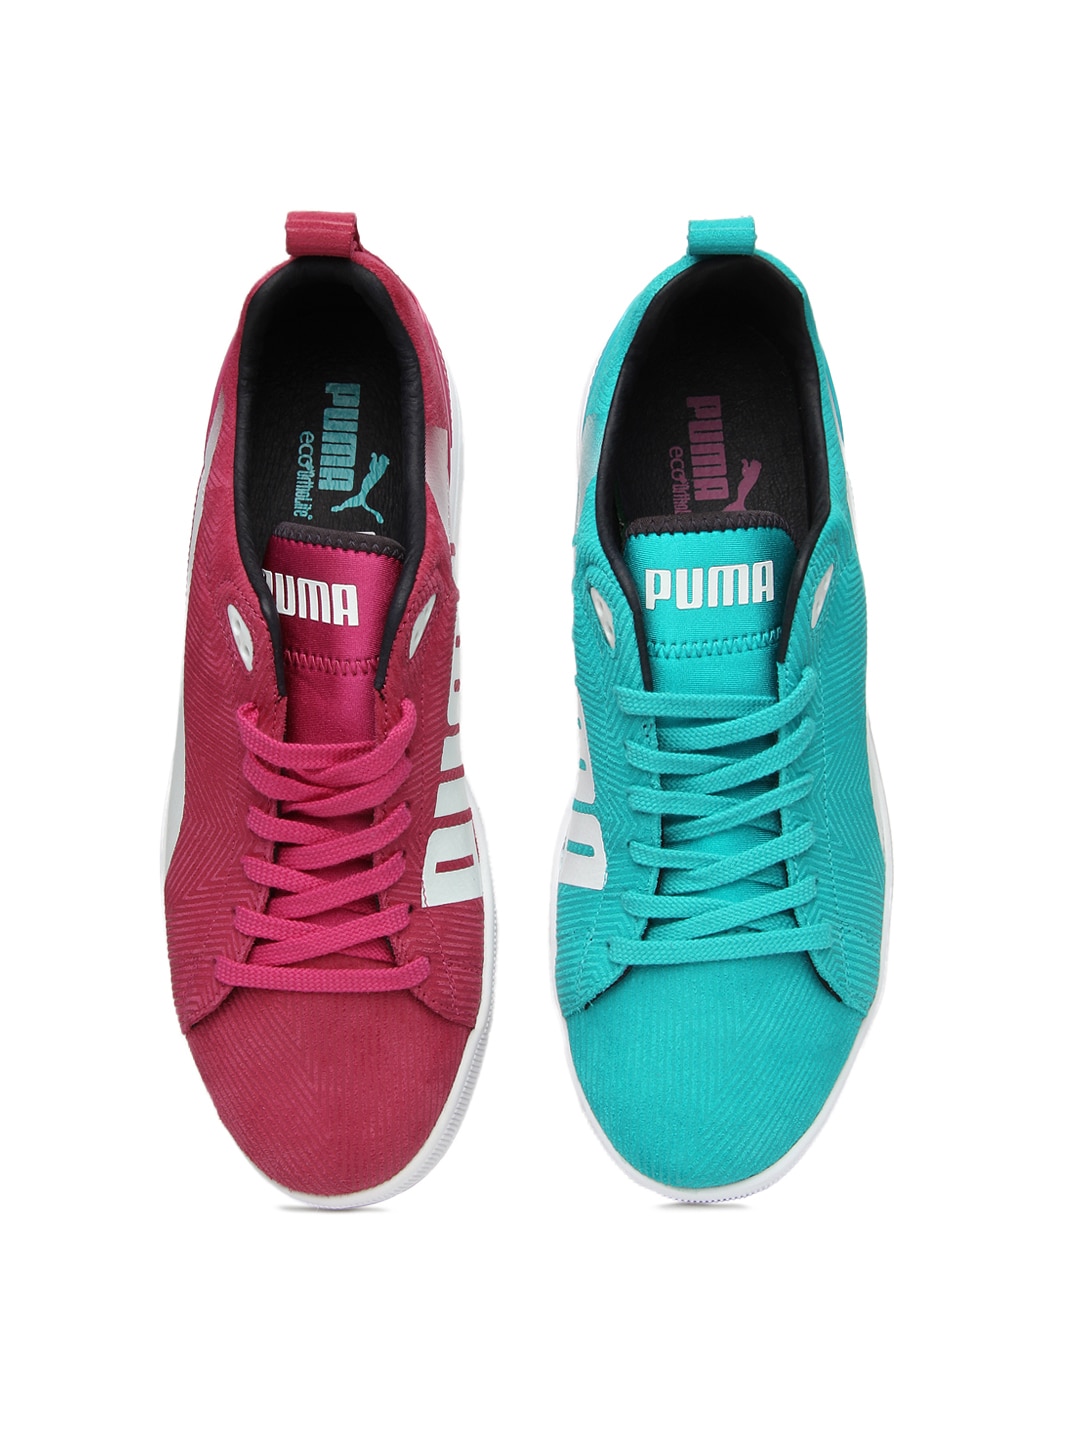 puma pink and blue shoes india off 63 